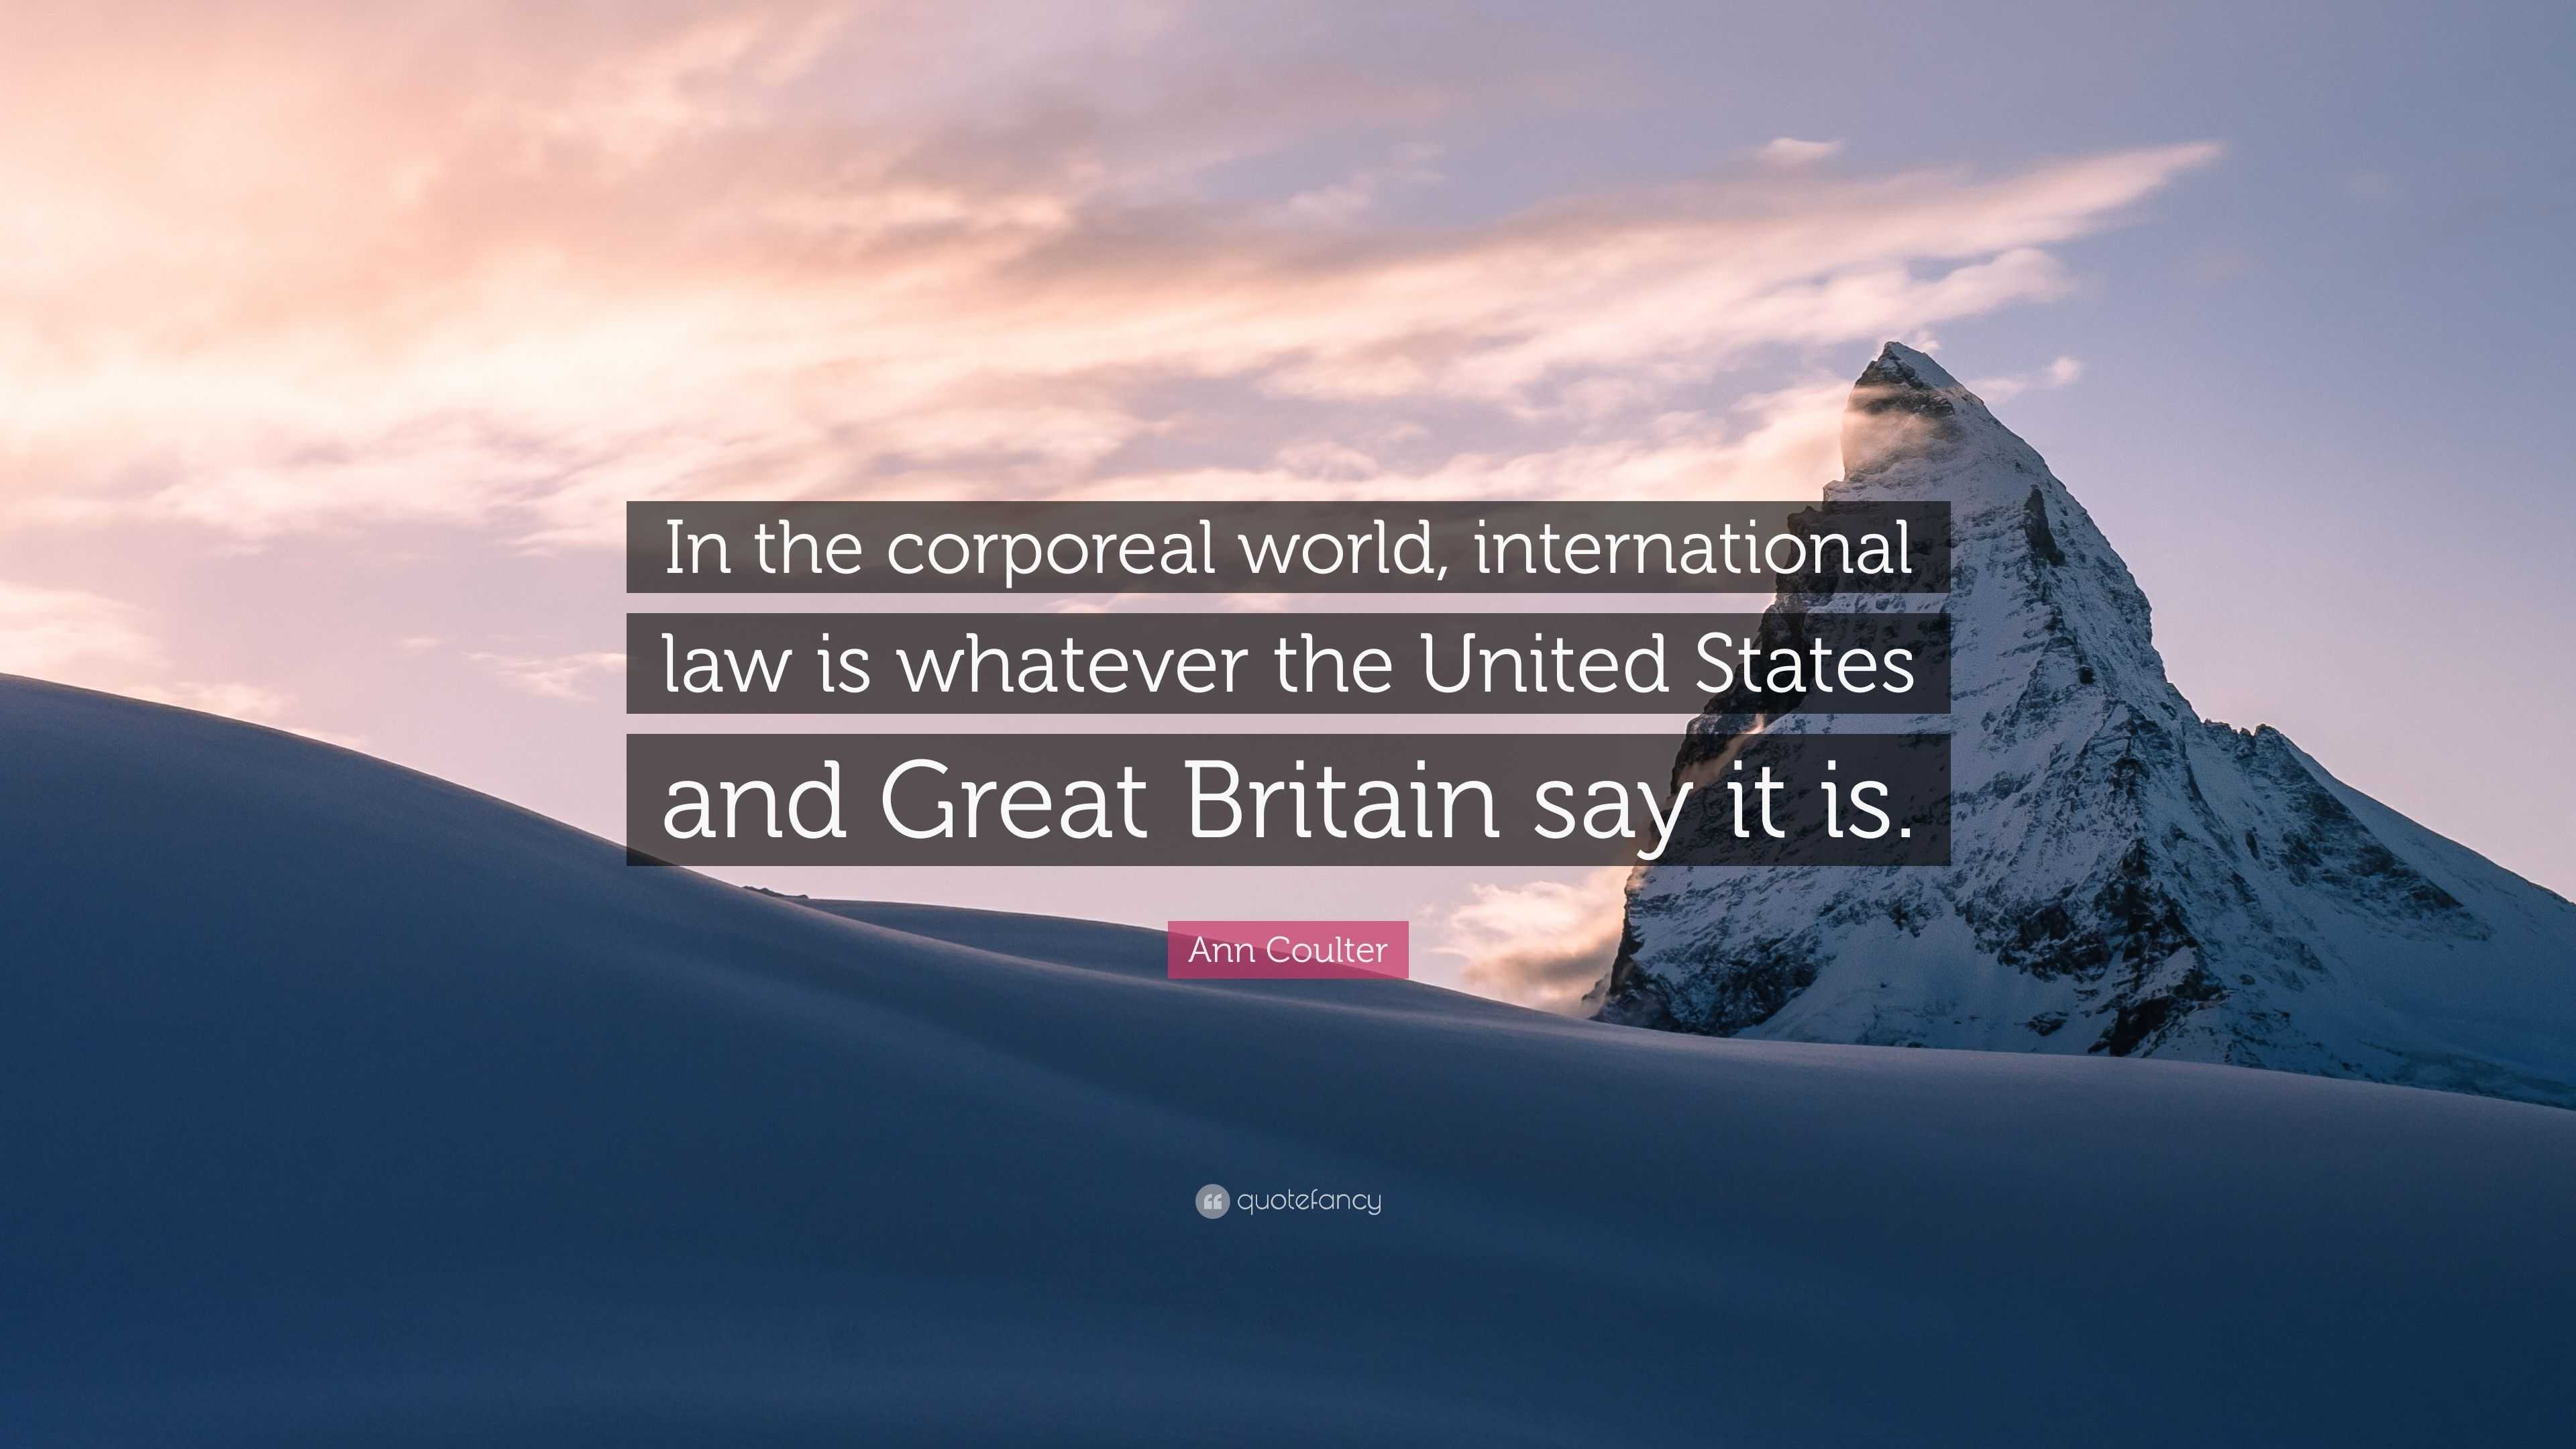 Ann Coulter Quote: “In the corporeal world, international law is